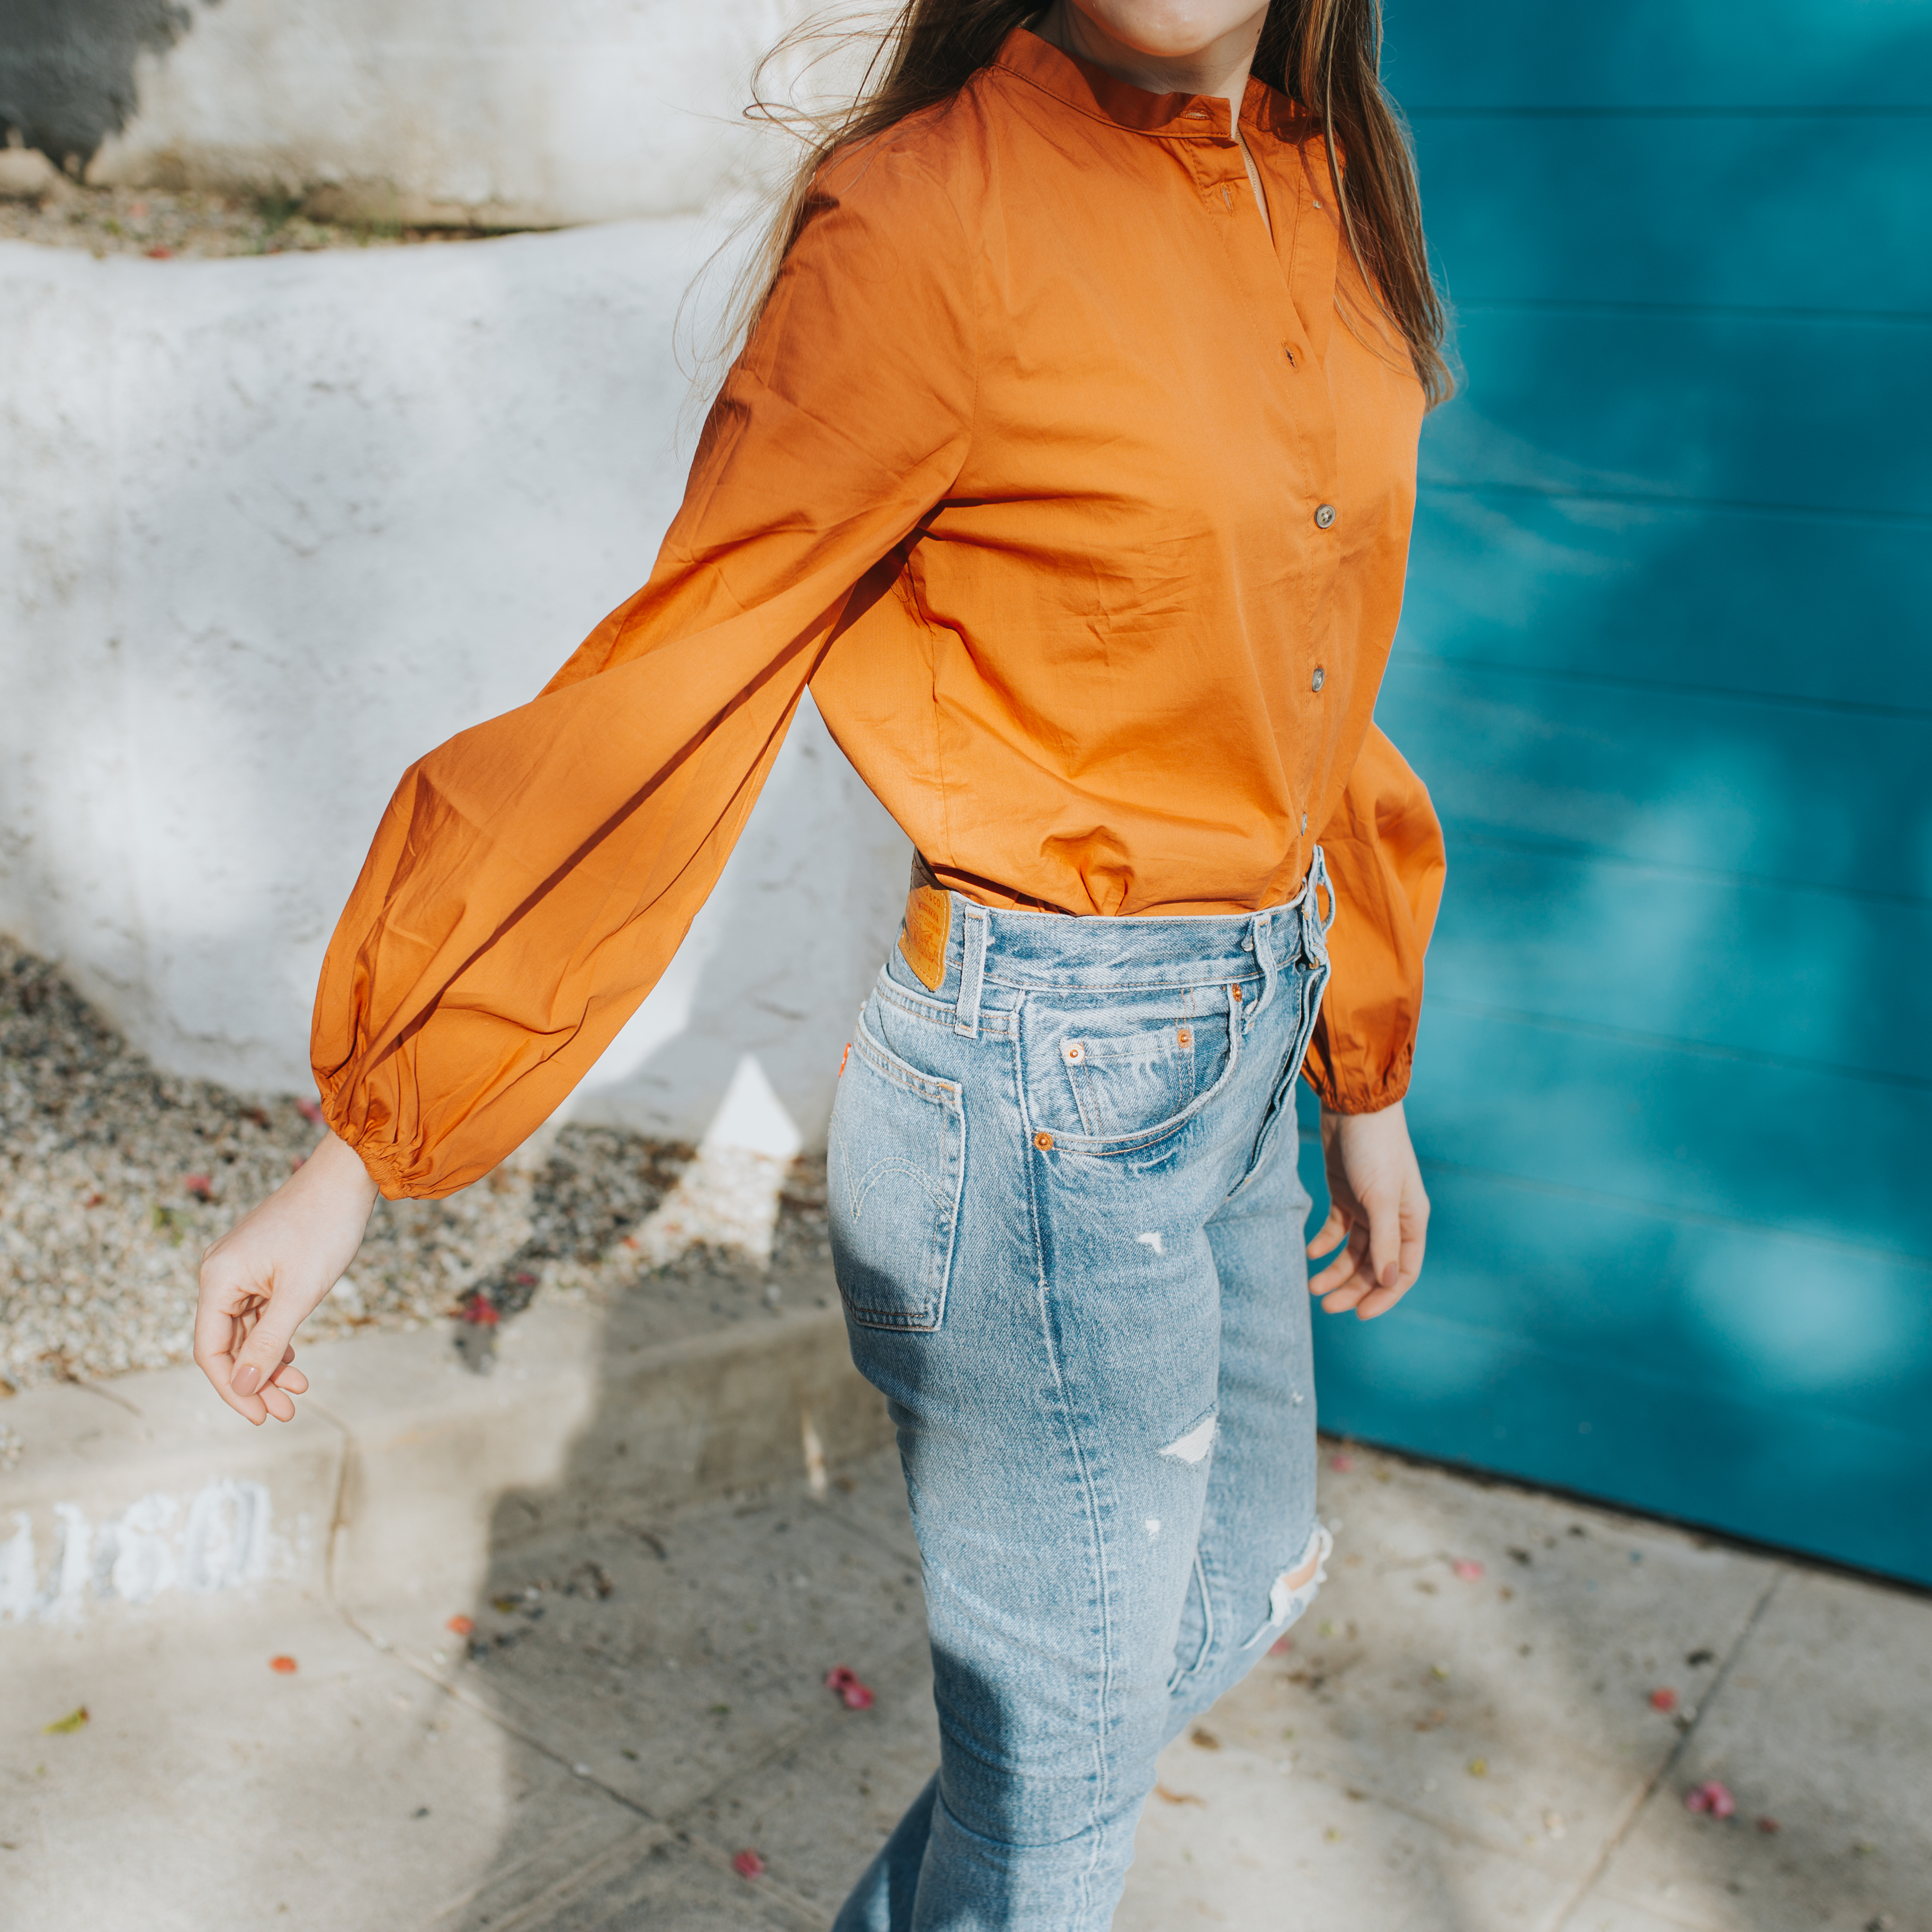 On Trend: Orange During The Spring | Twinspiration